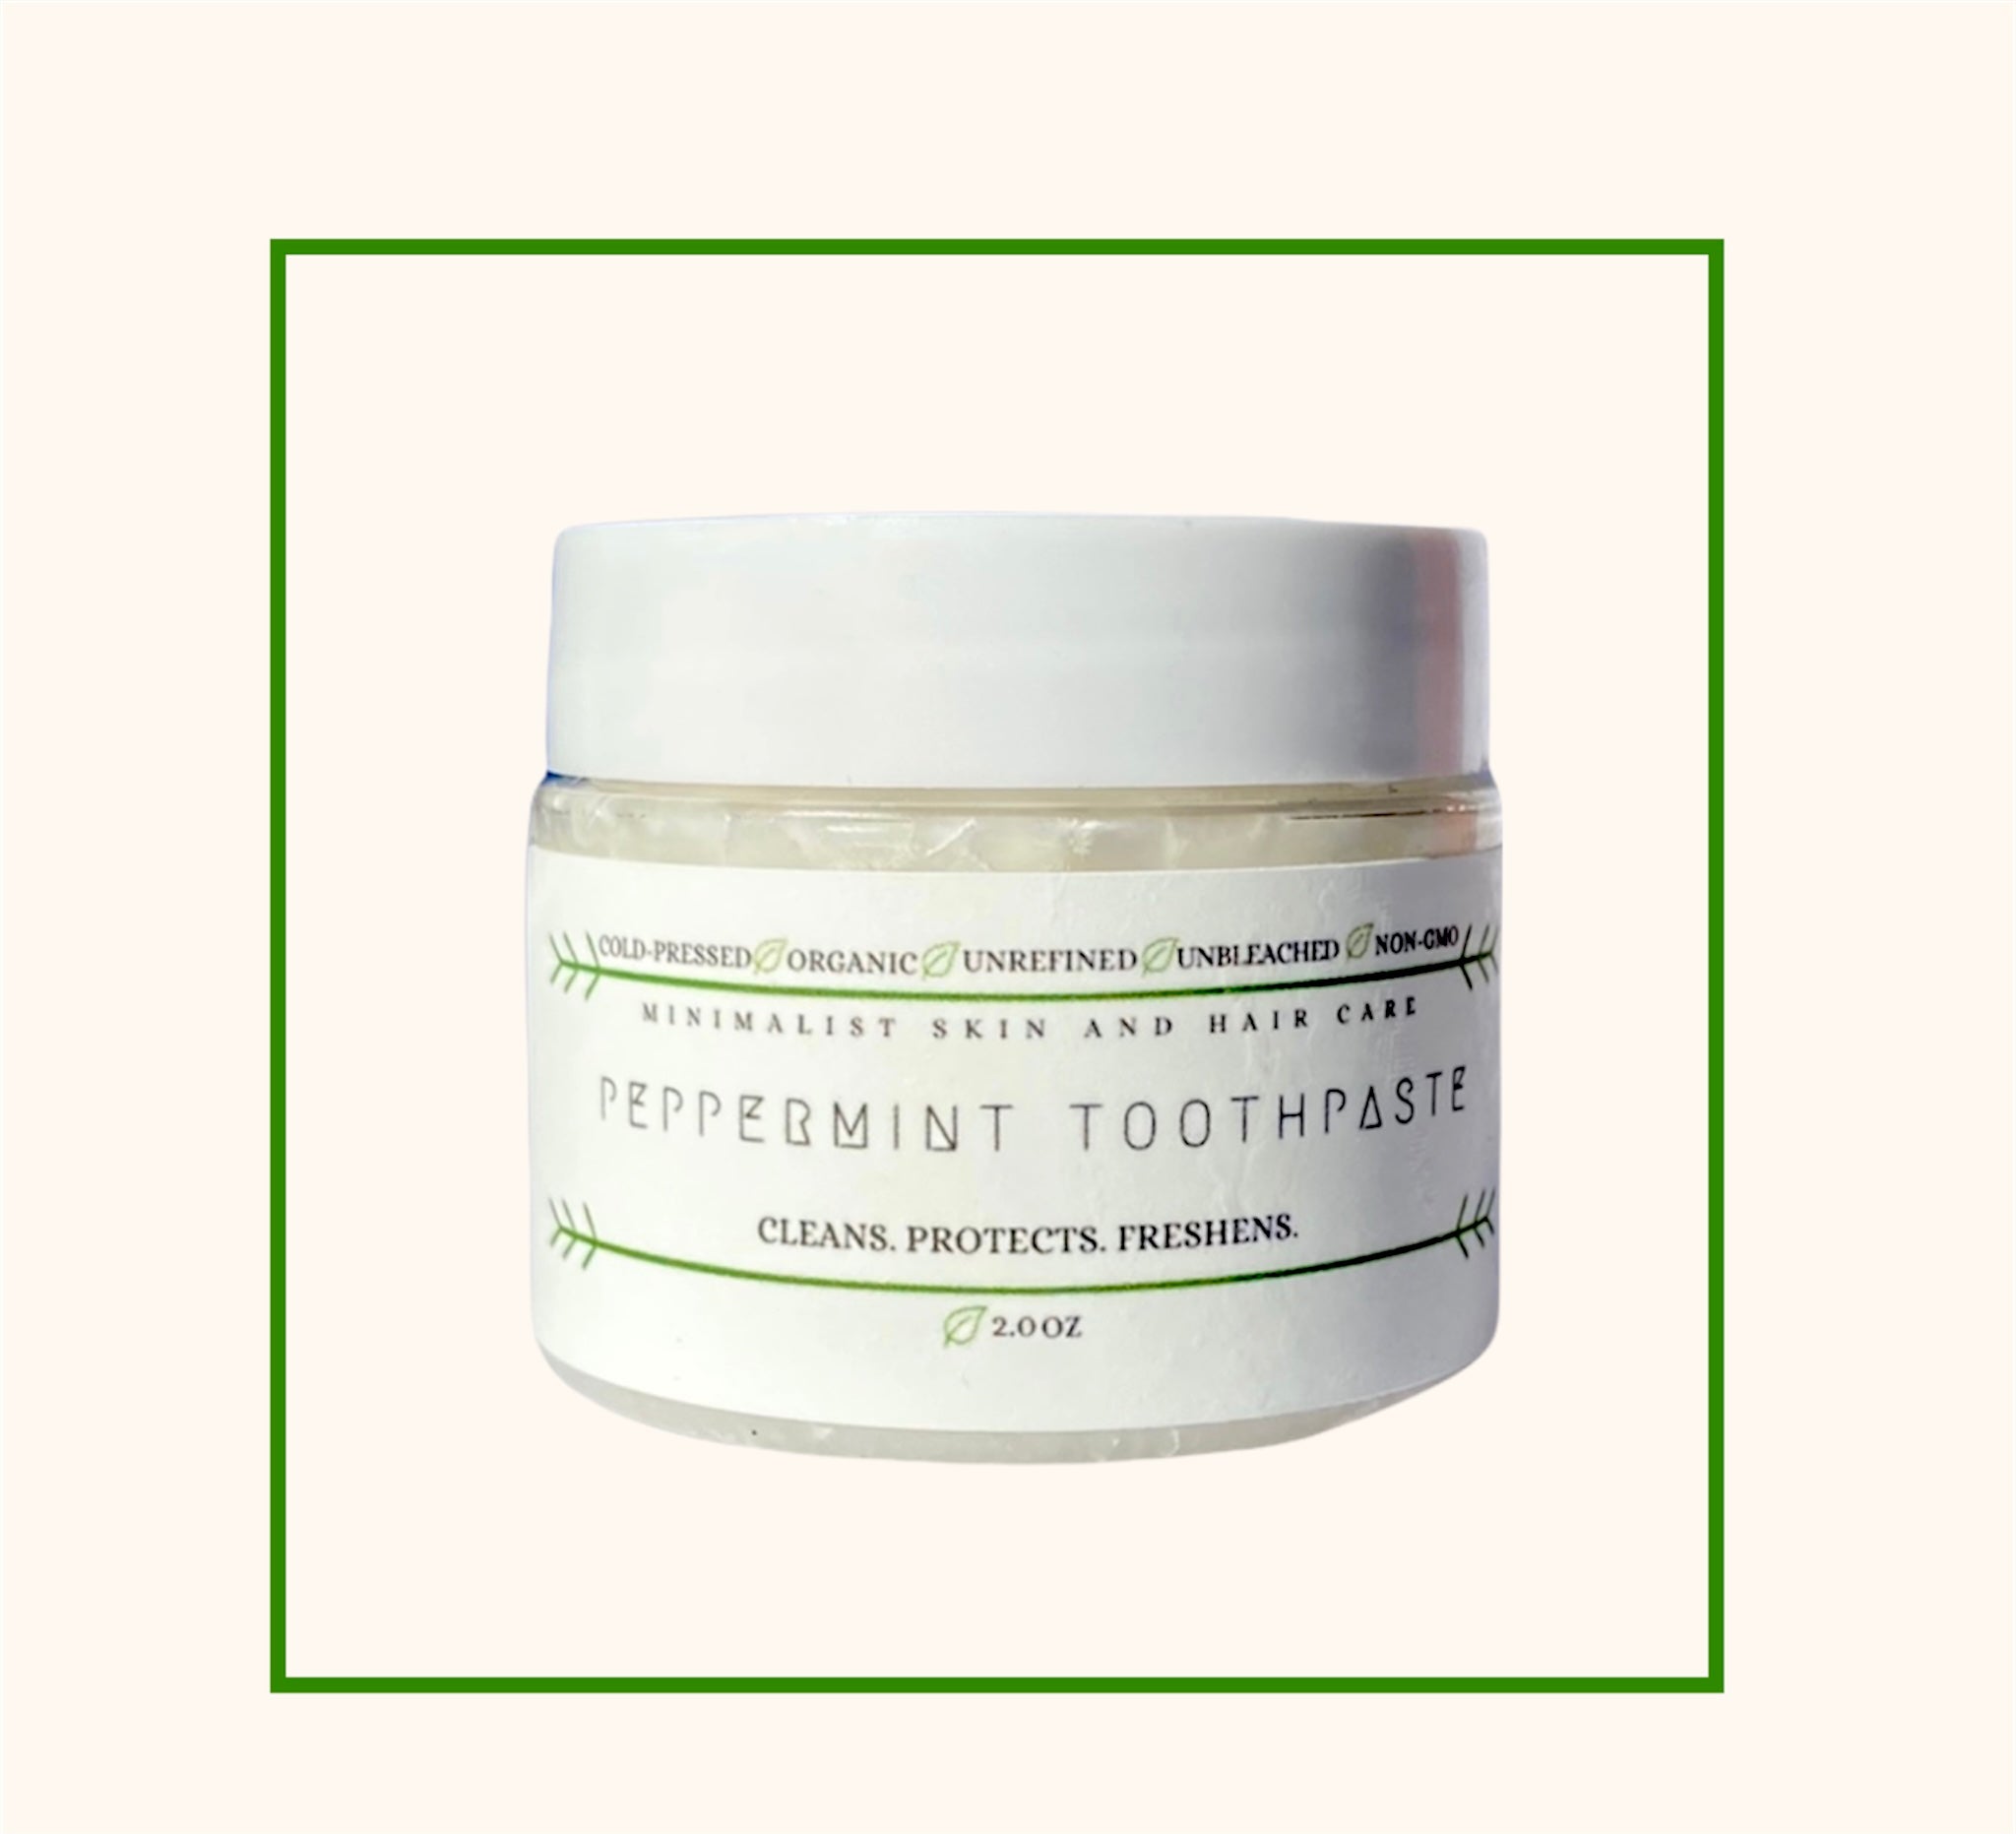 Peppermint Toothpaste